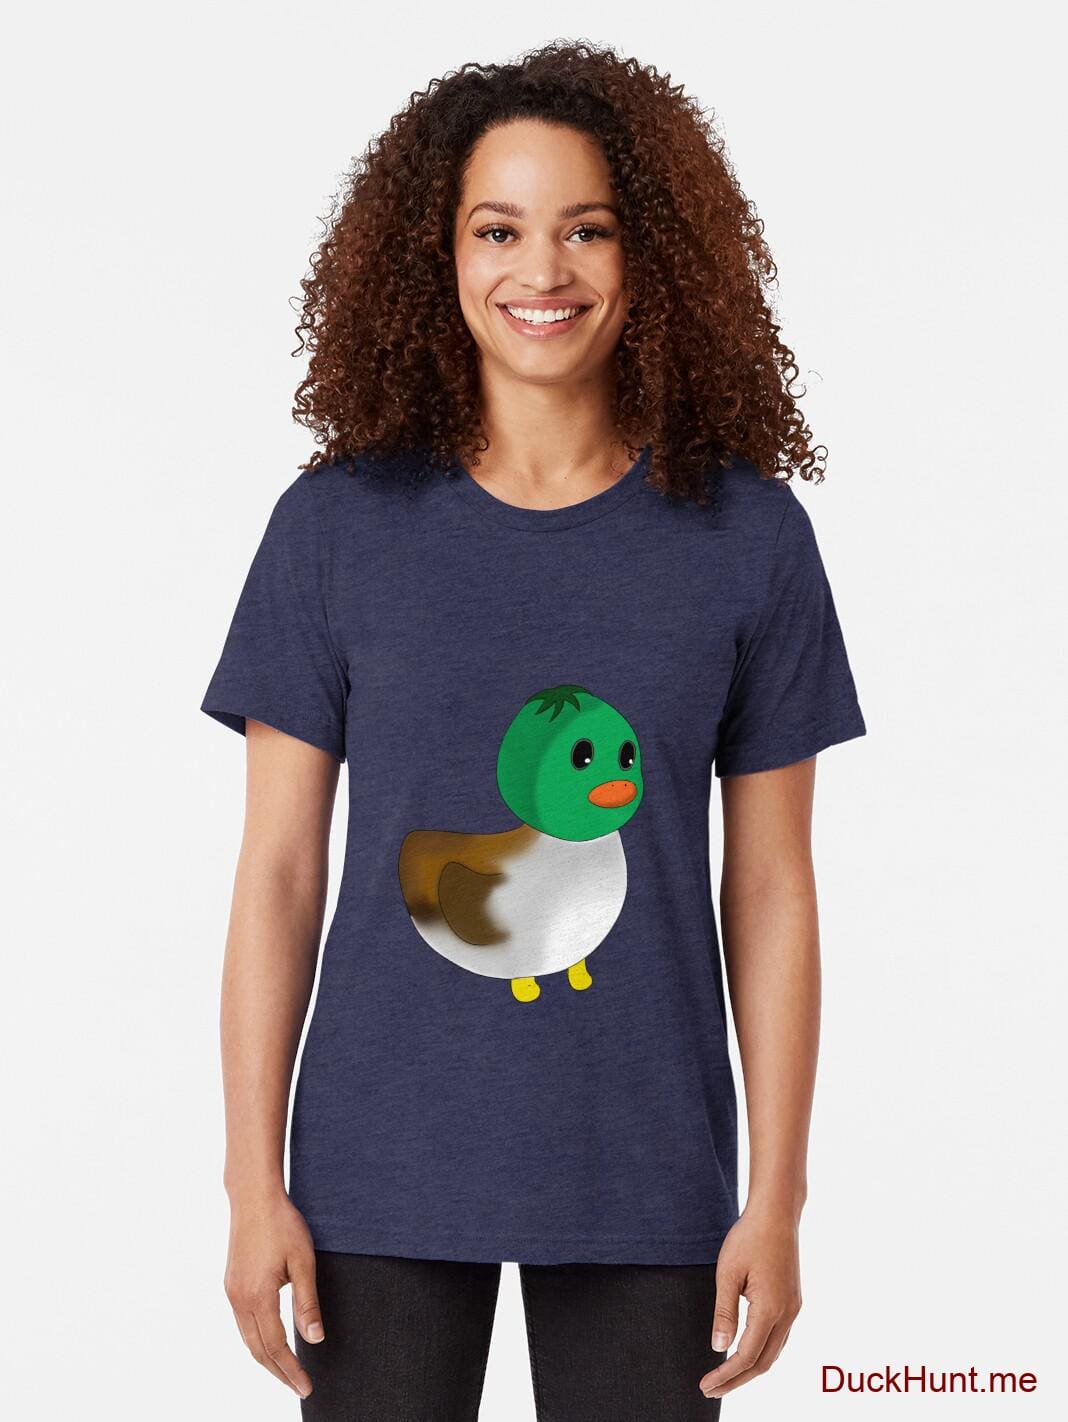 Normal Duck Navy Tri-blend T-Shirt (Front printed) alternative image 1